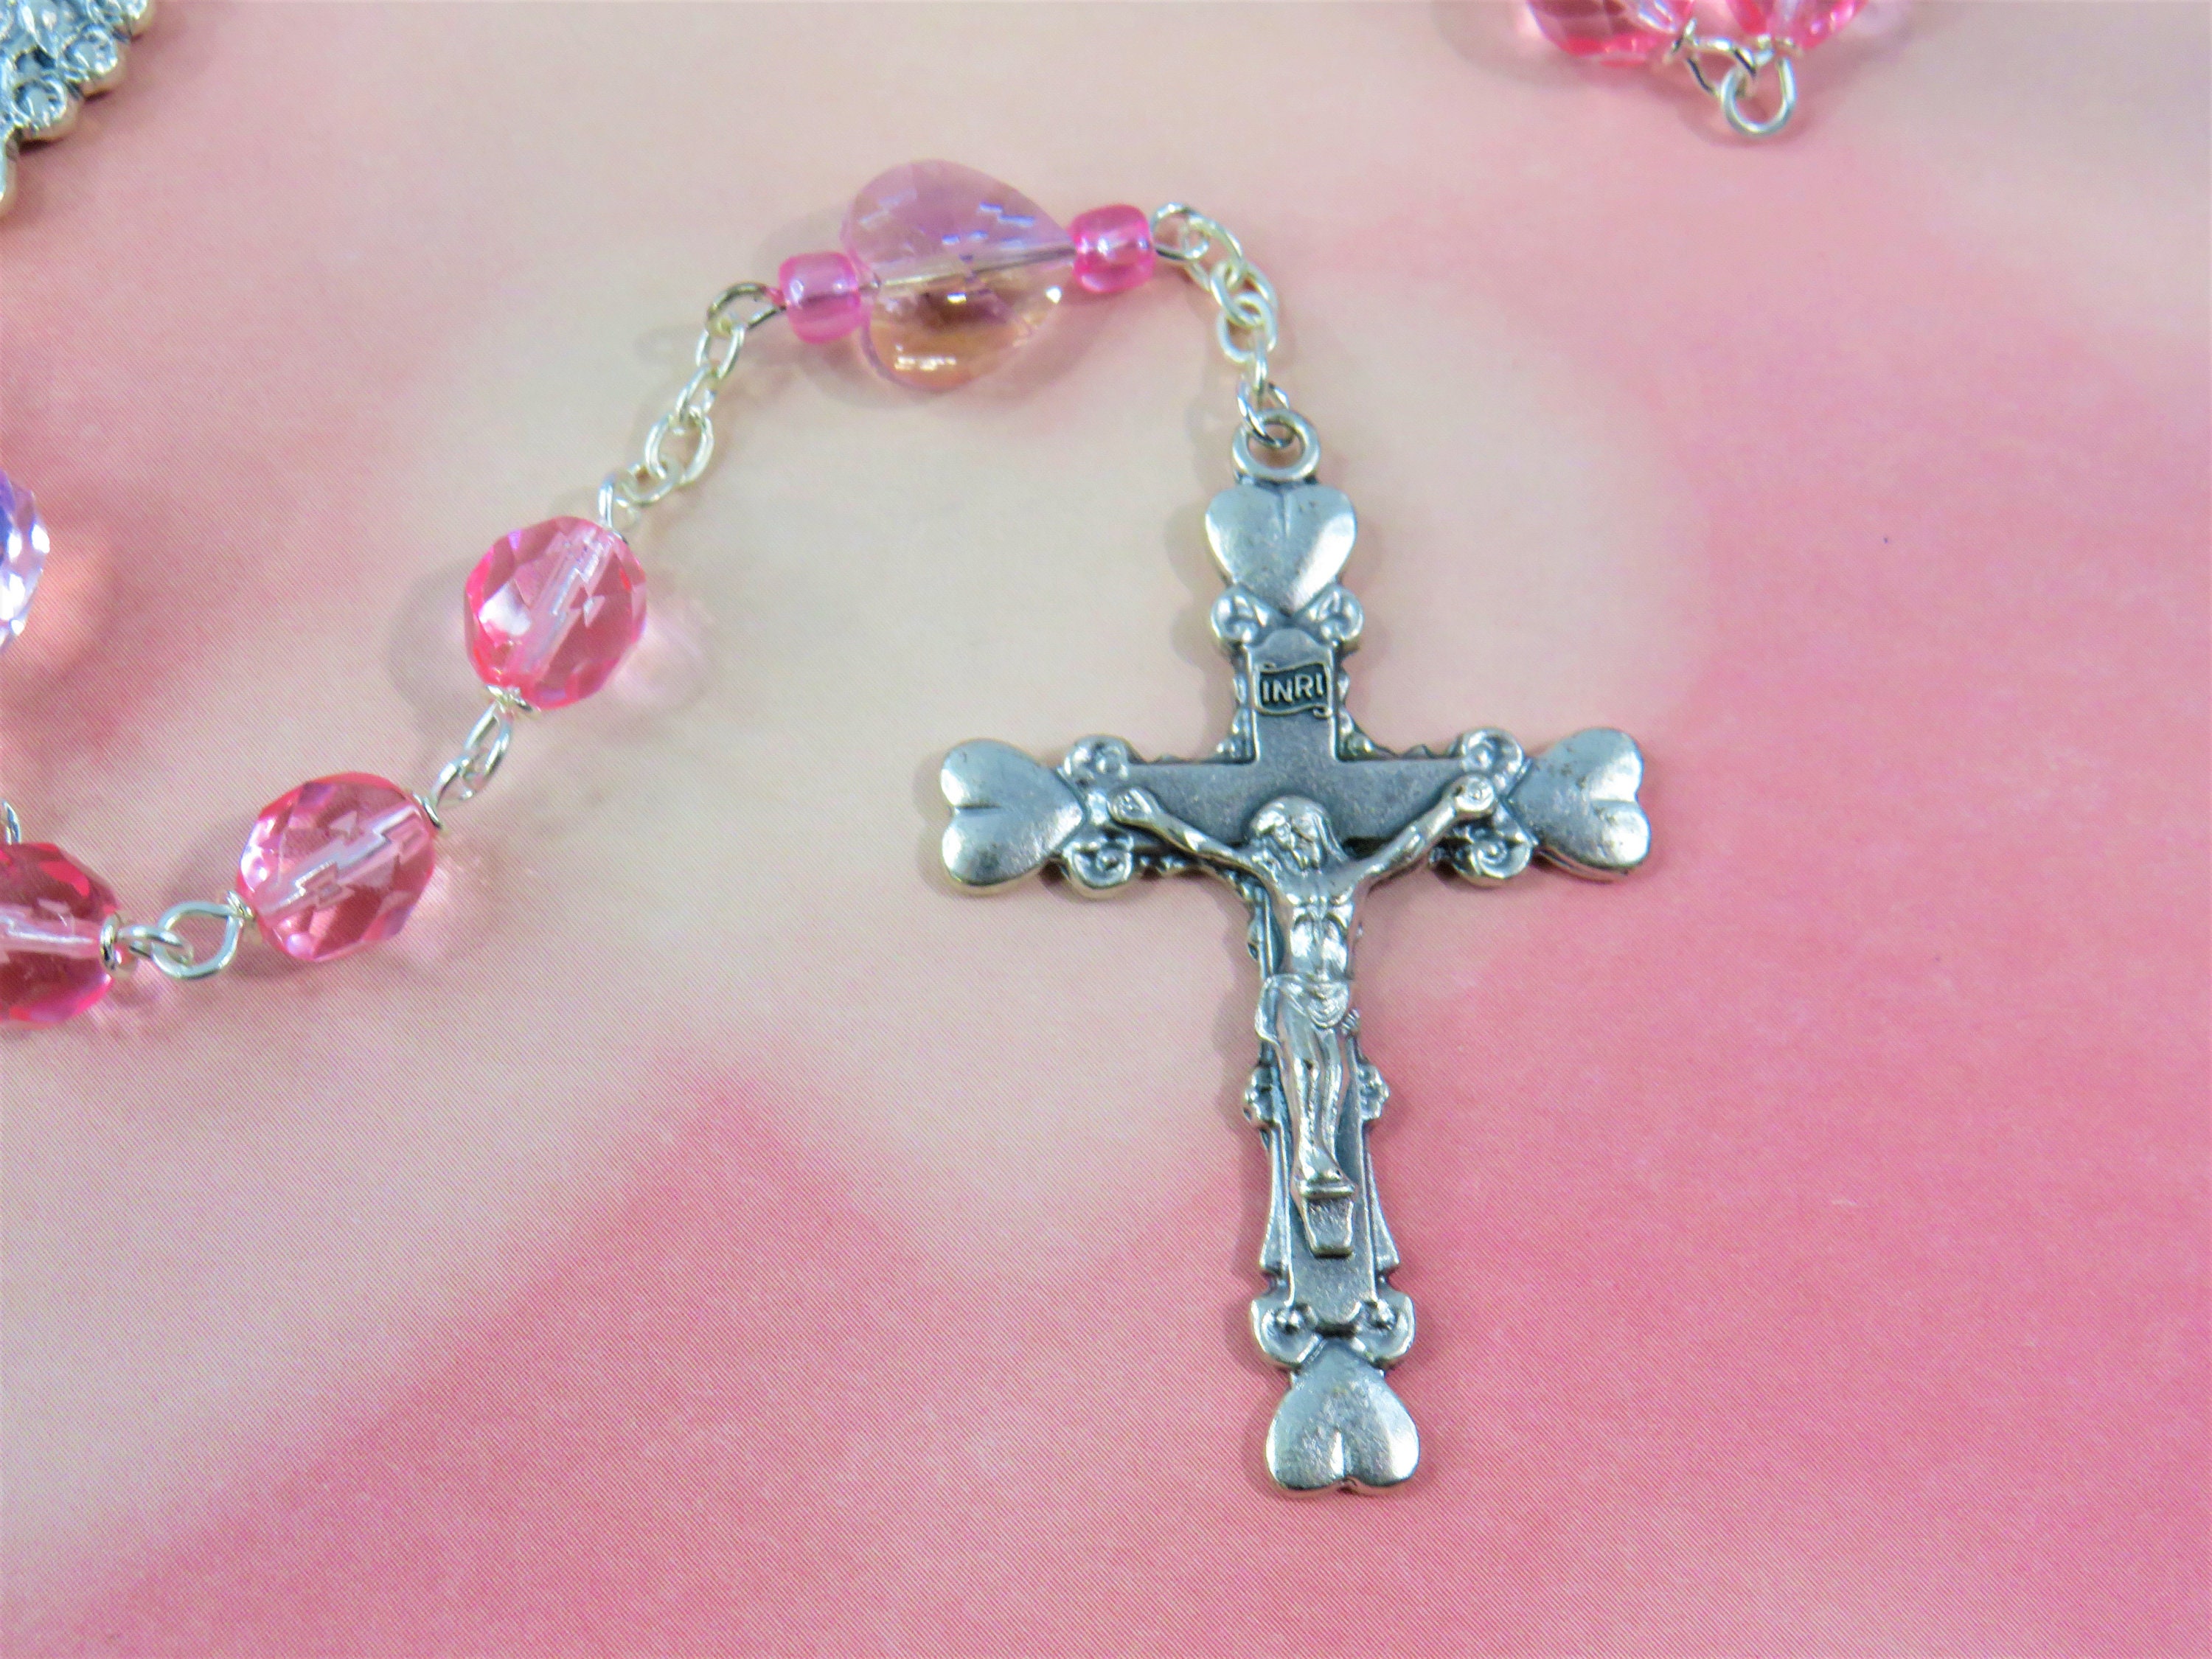 Cherry Blossom Pink Beaded Rosary Chain 6mm Crystal Candy Jade Stone  Antique Silver Plated Per Foot